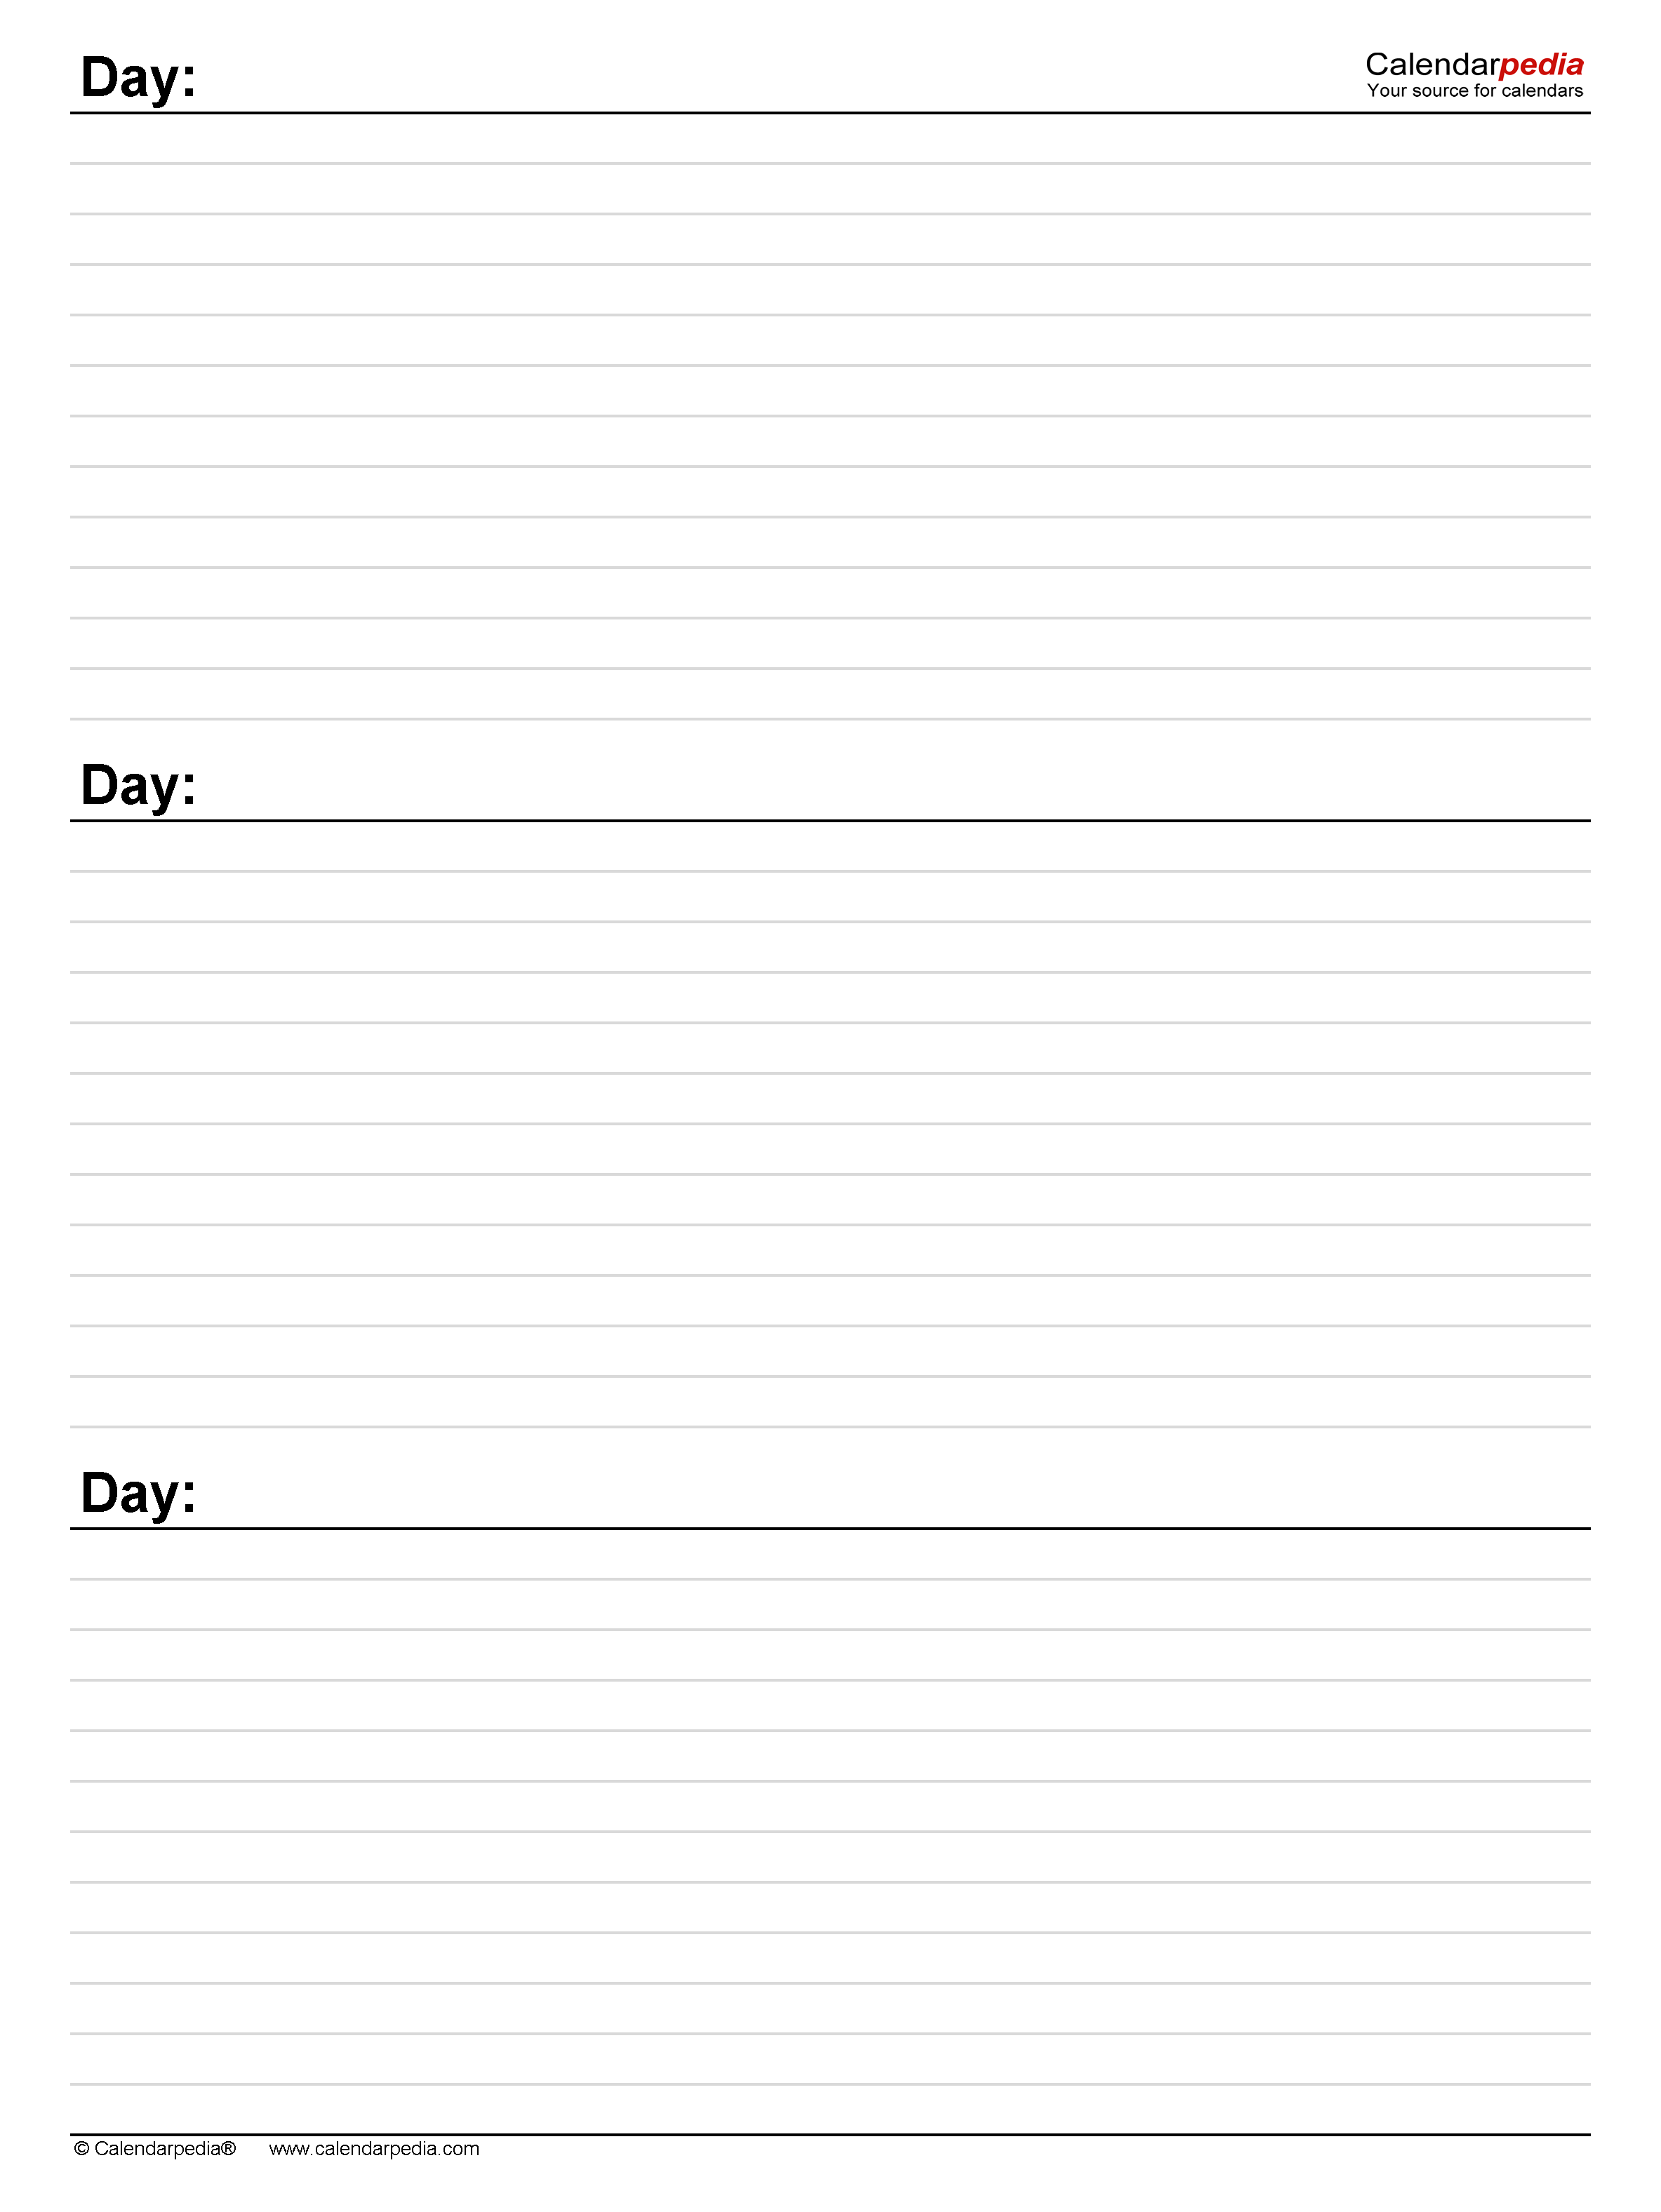 Free Daily Planners In PDF Format 20 Templates